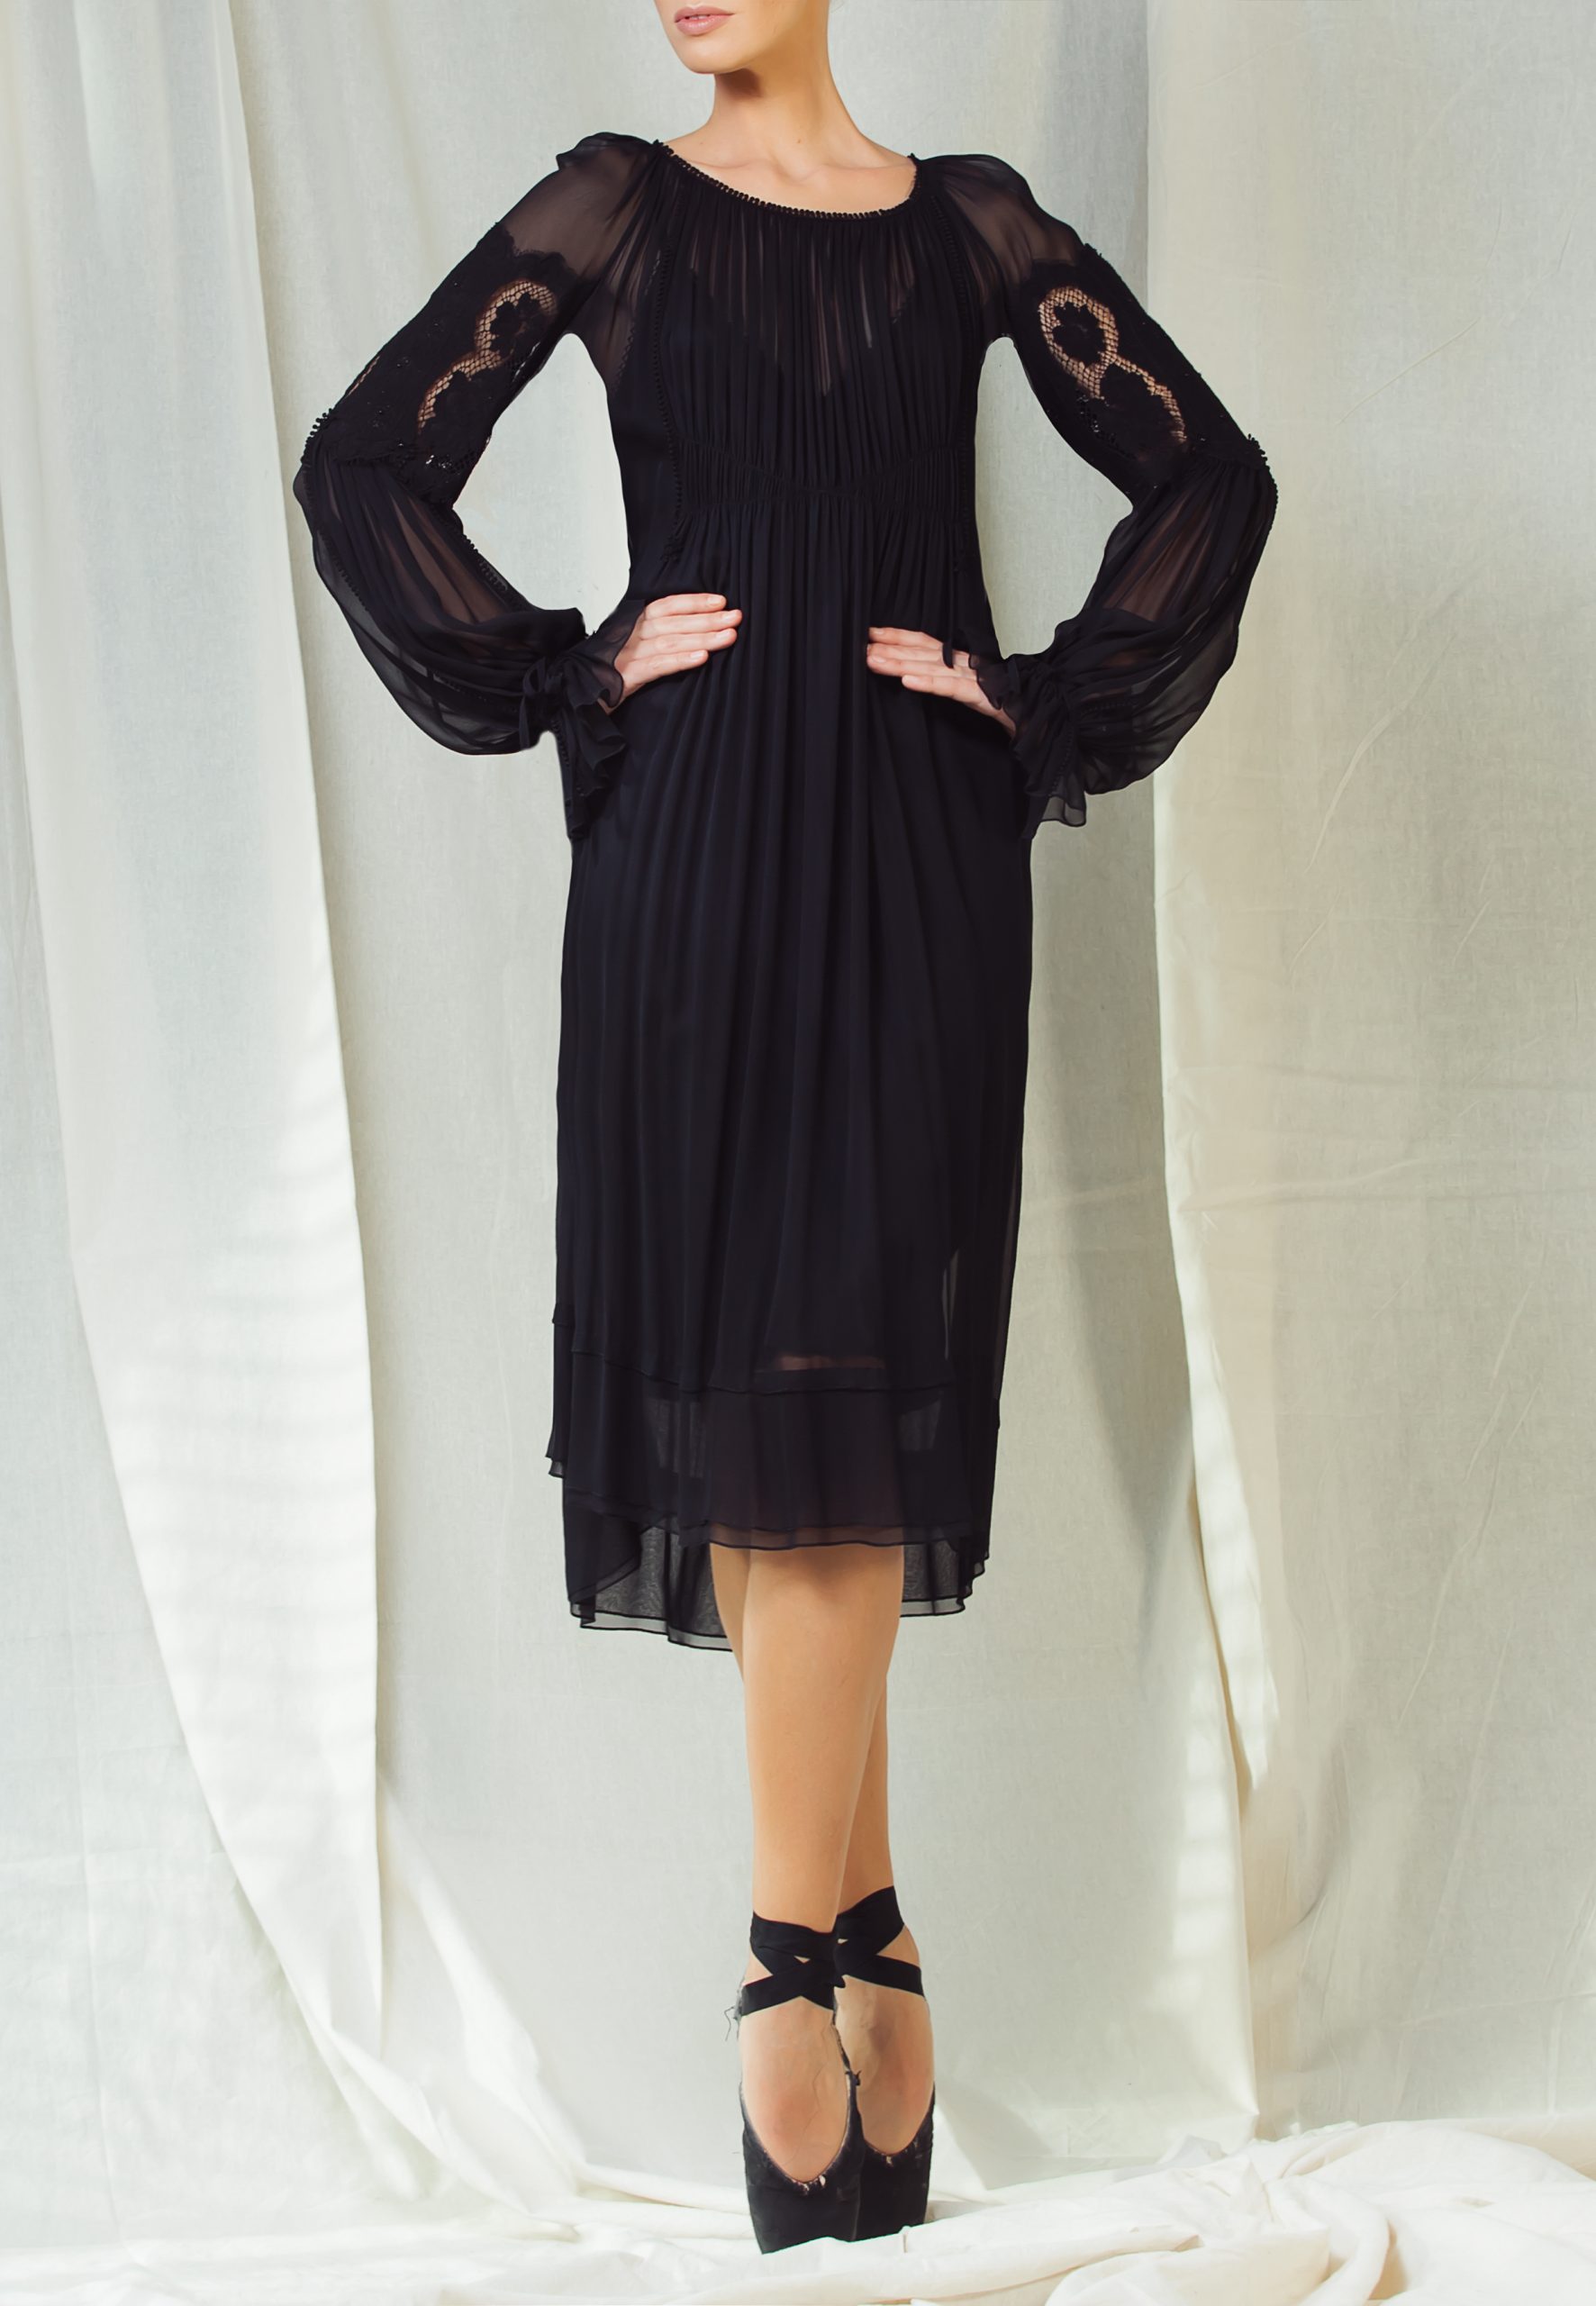 Black Silk dress with lace